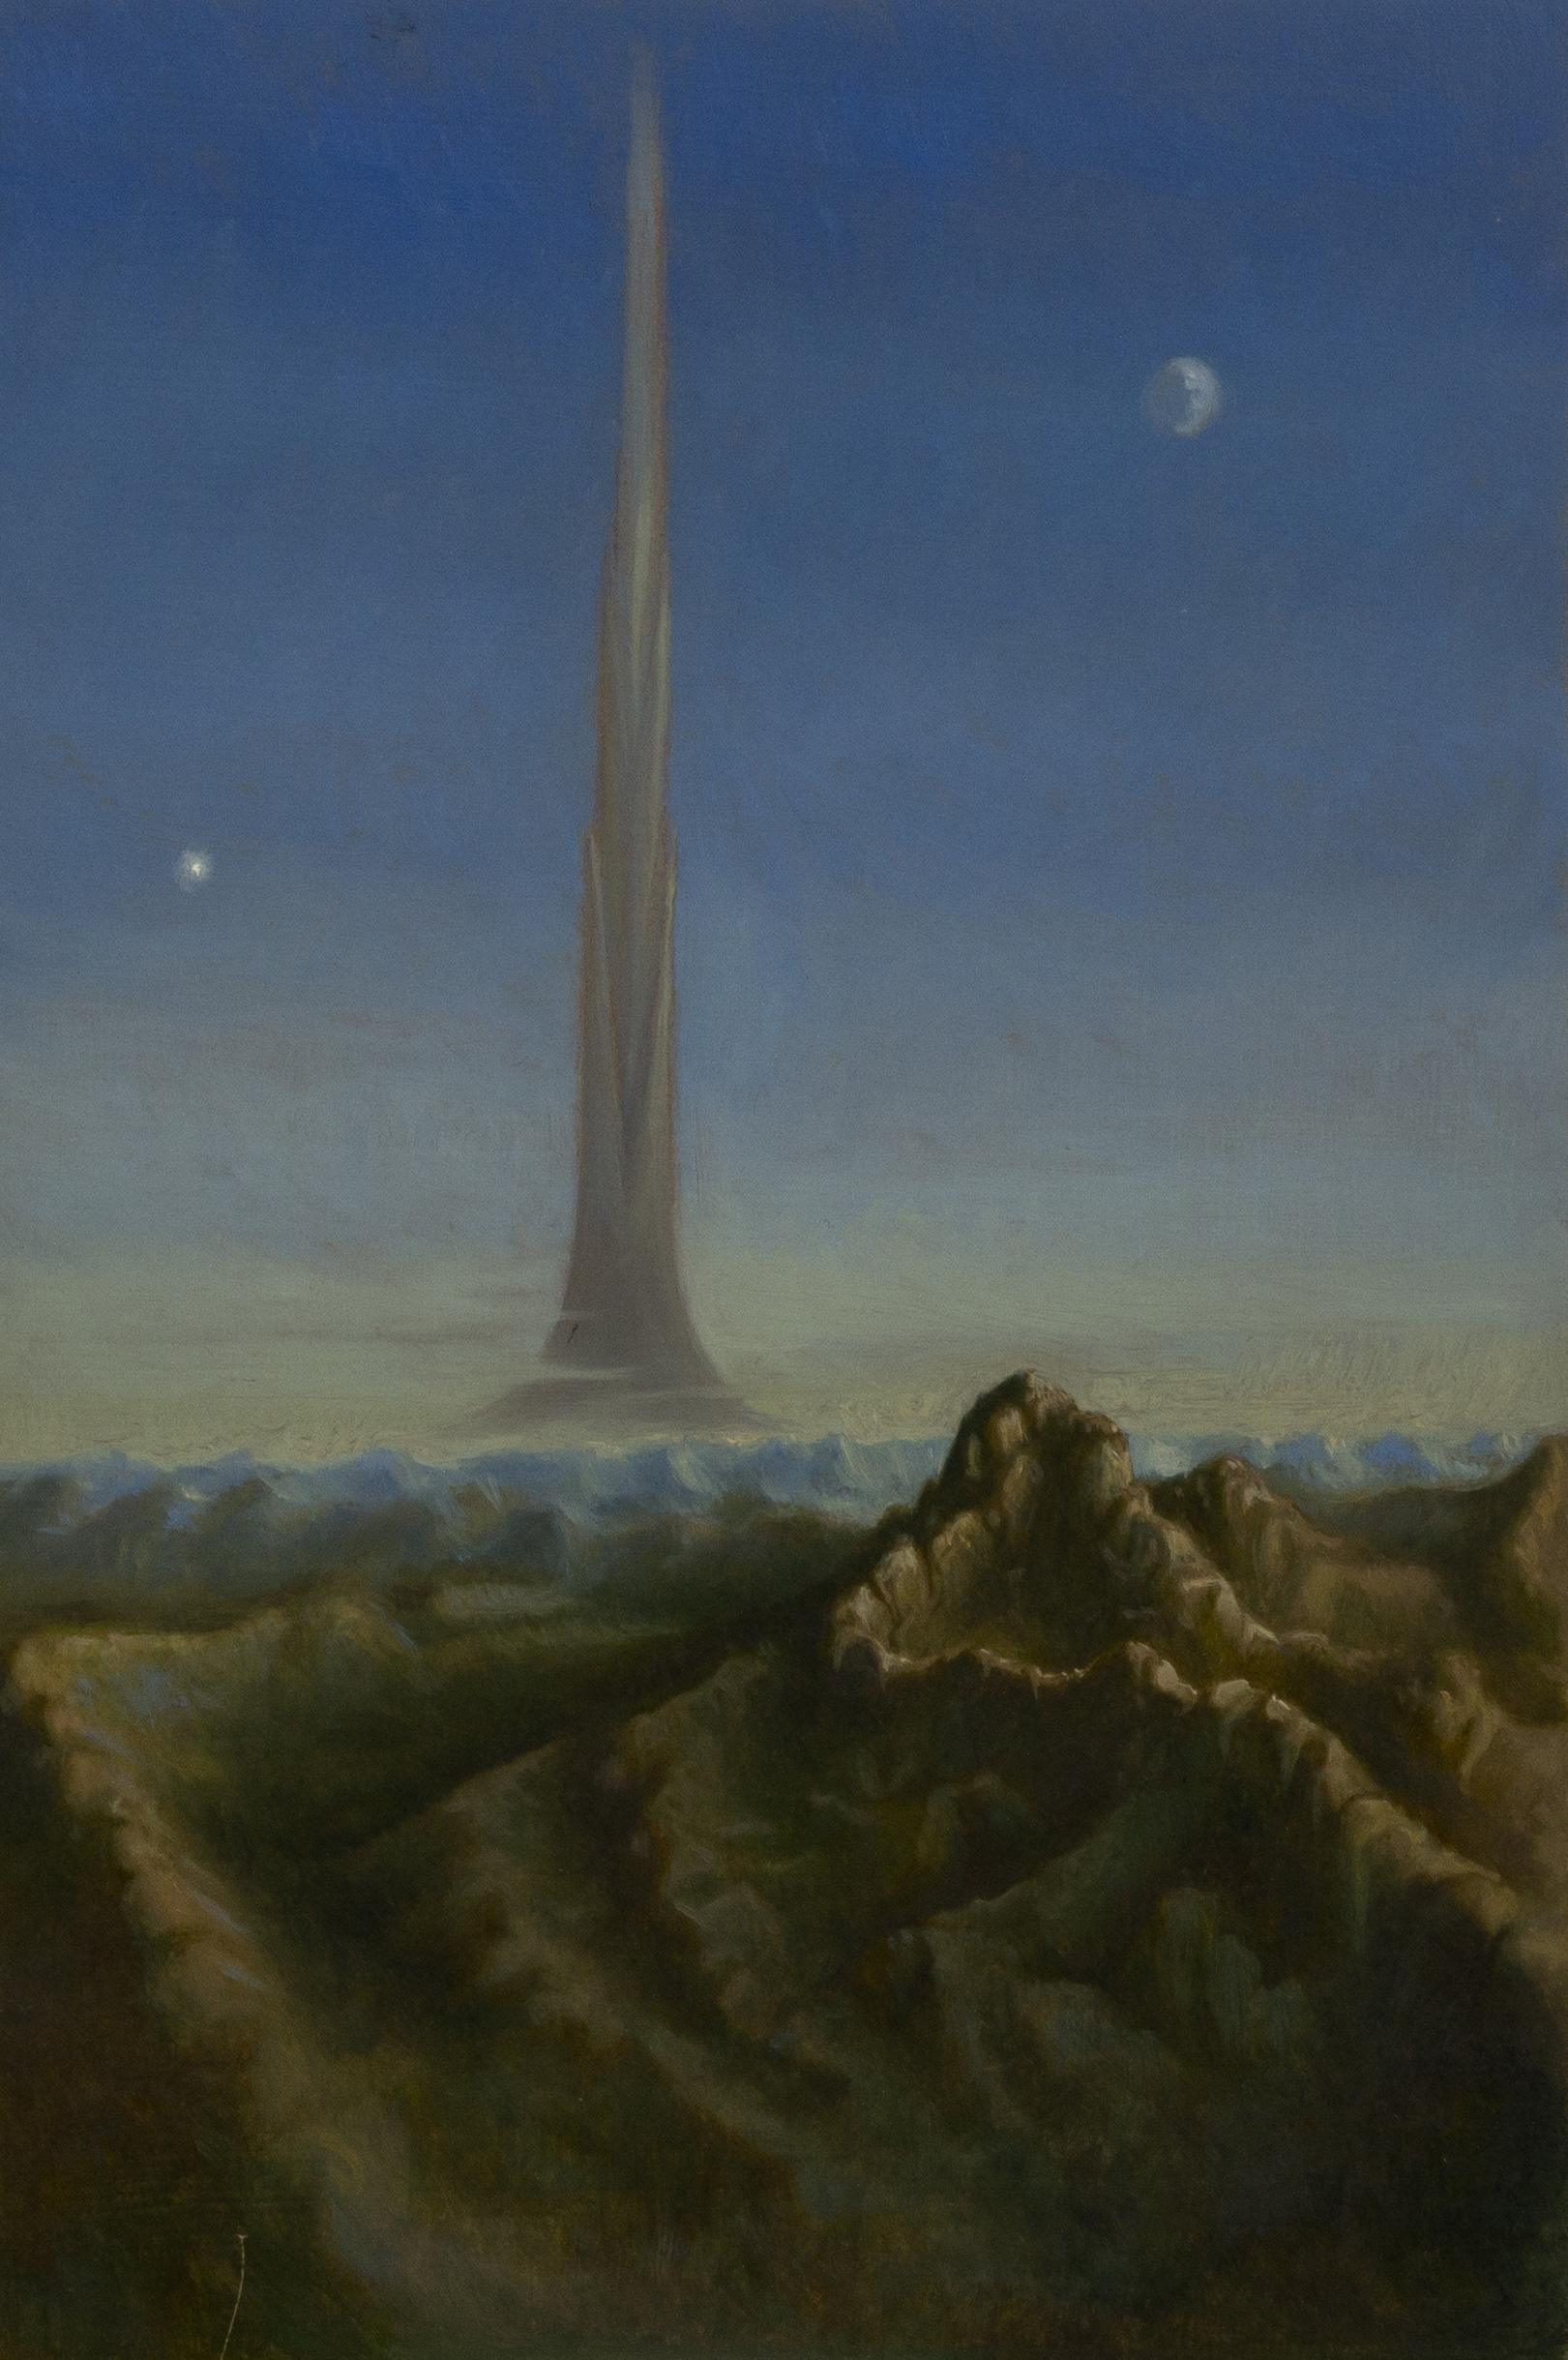   The tower of Babel ,  oil on board, cm 30x20, 2006  